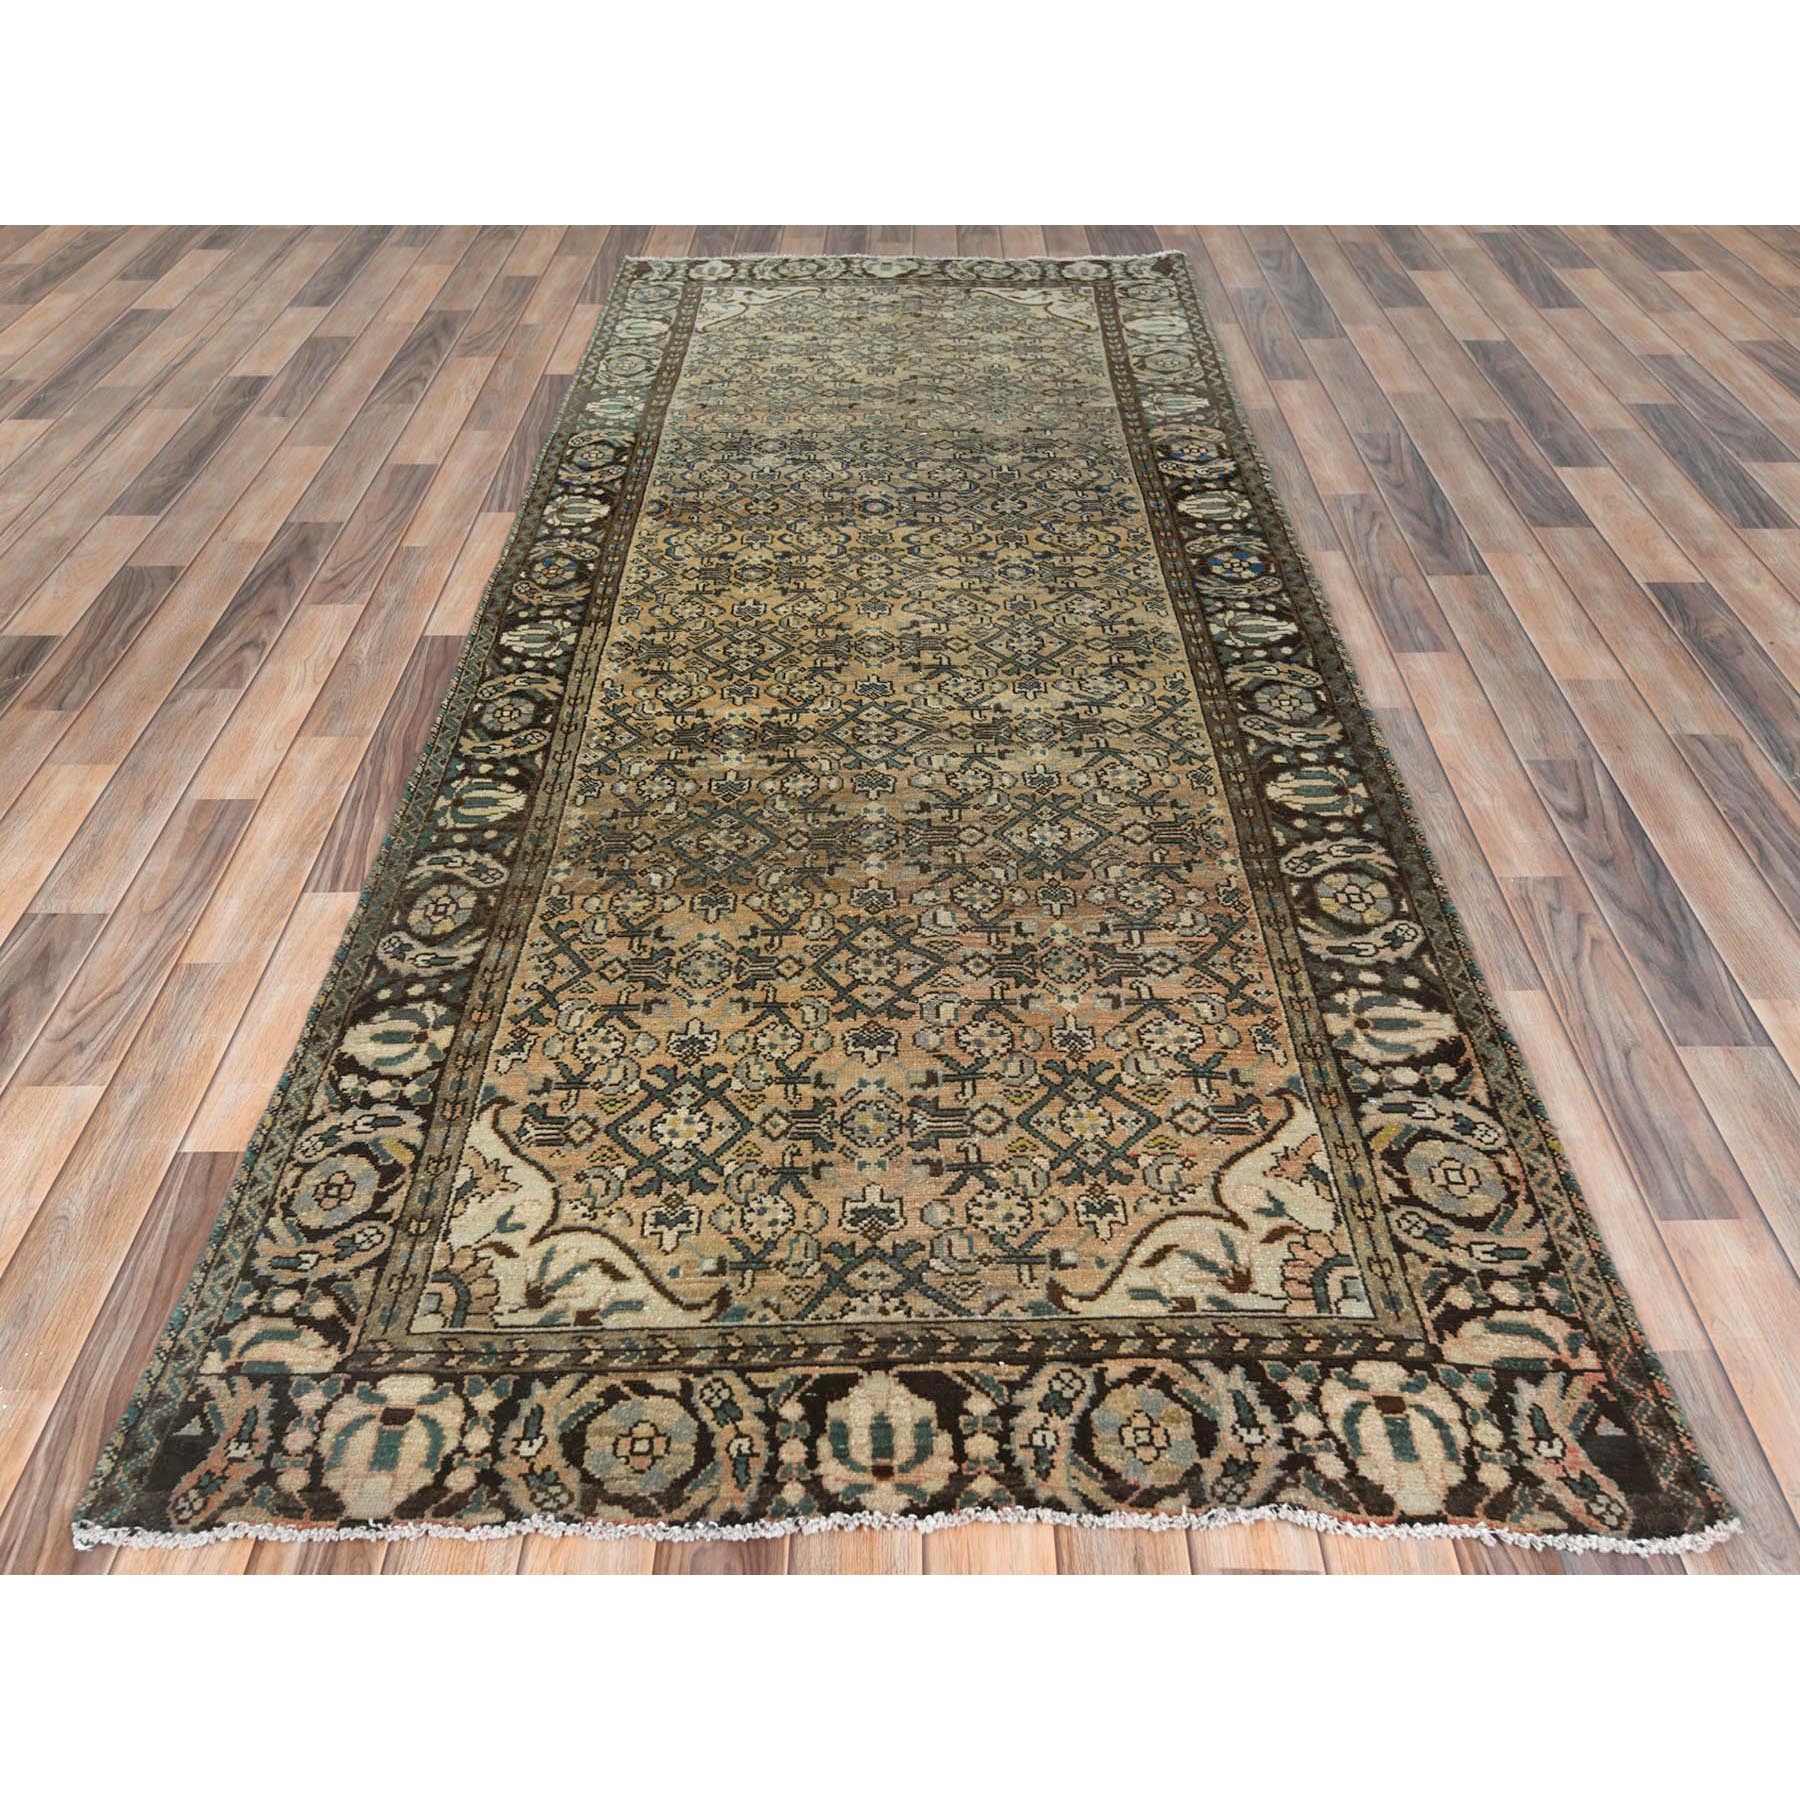 4'x9'9" Light Brown, Fish Mahi All Over Design Vintage Persian Hamadan with Abrash, Hand Woven, Worn Down, Distressed Look, Pure Wool Wide Runner Oriental Rug 